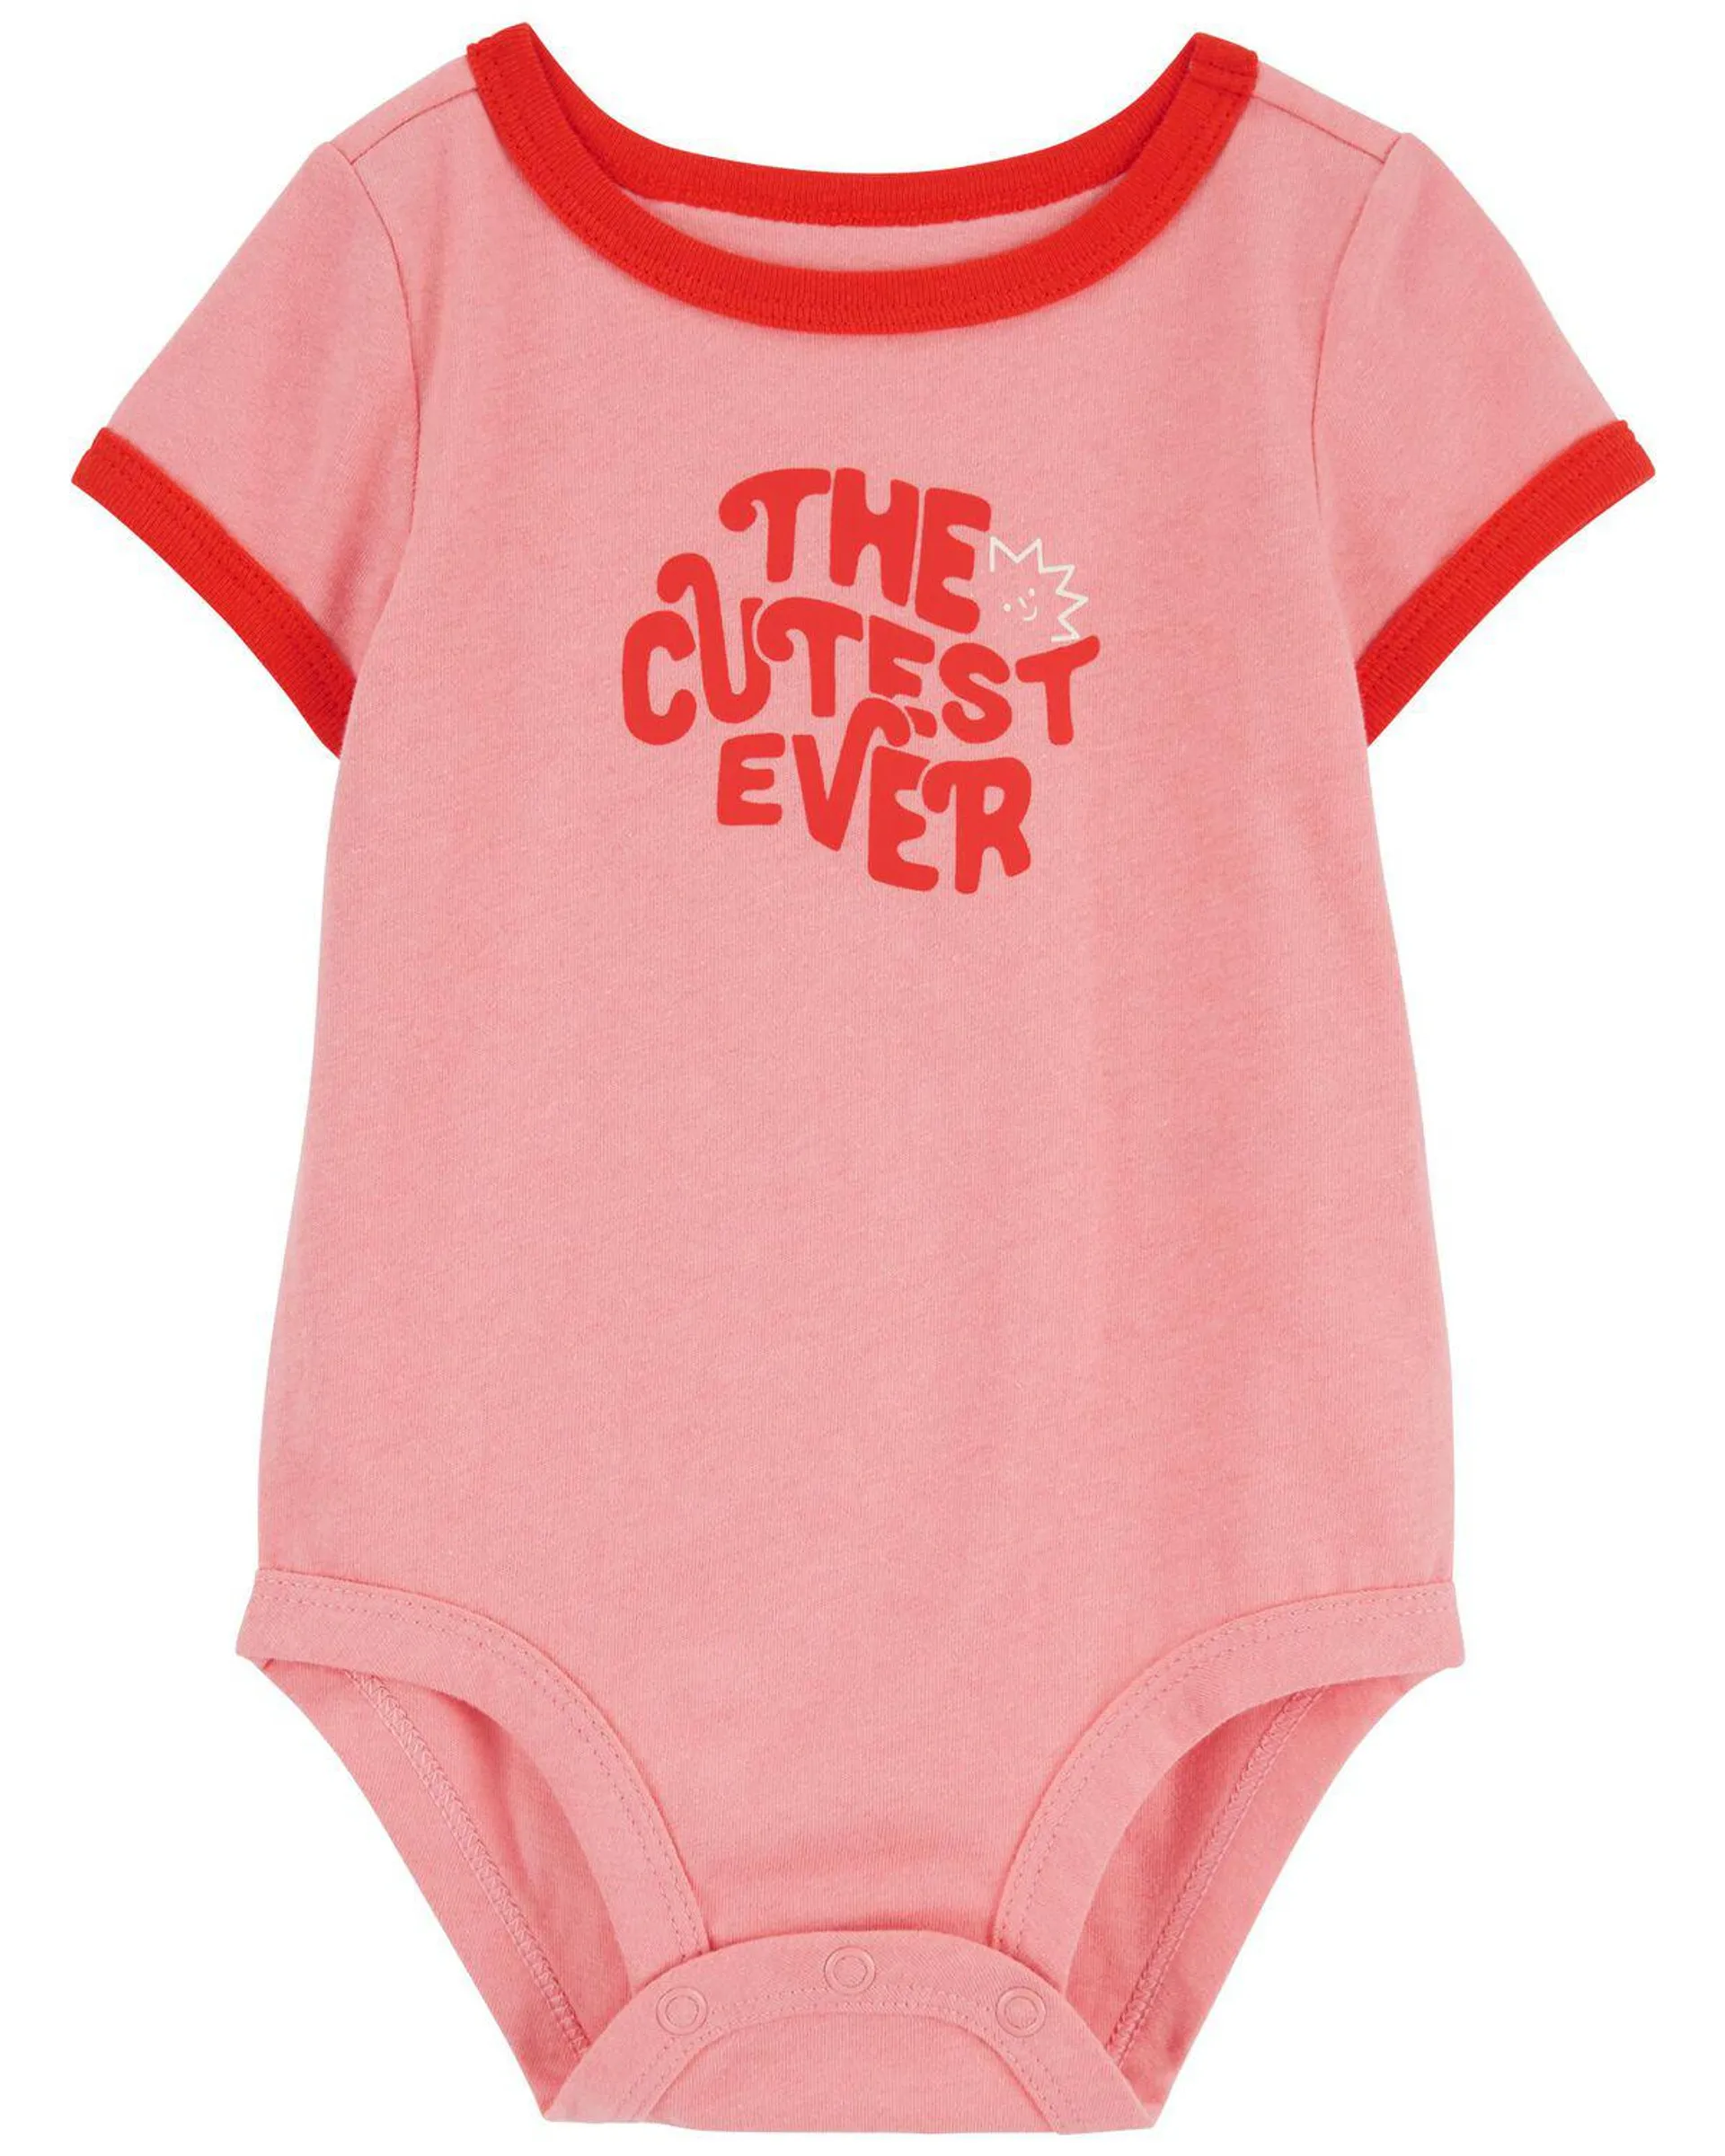 Baby The Cutest Ever Cotton Bodysuit